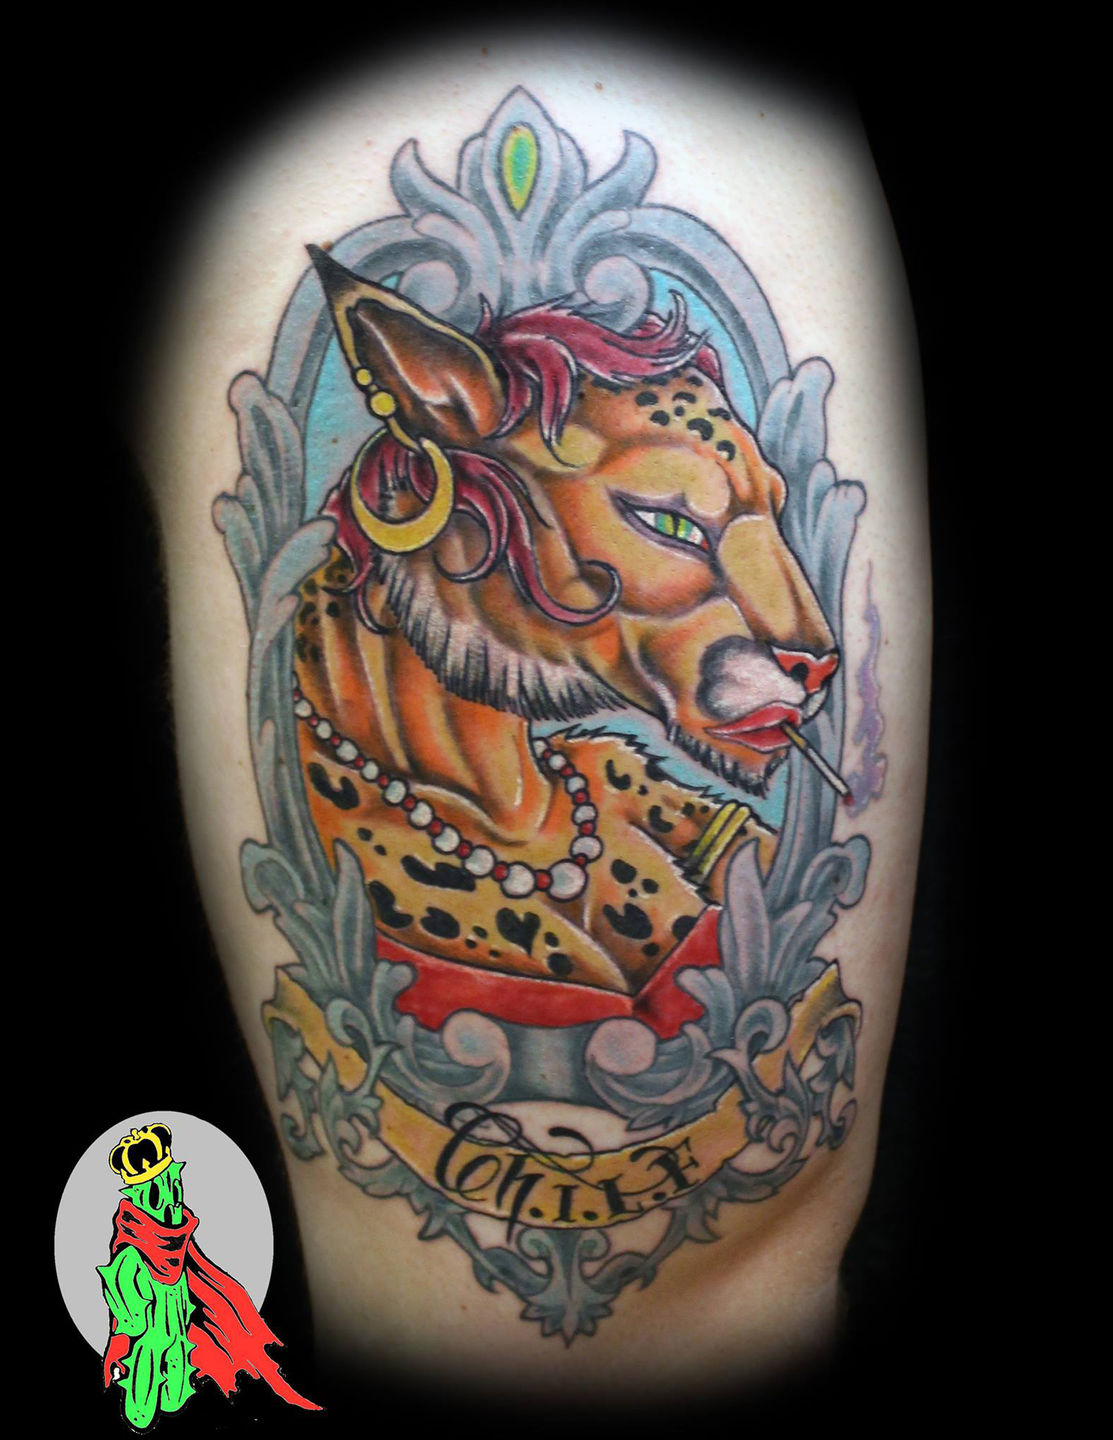 Ink Master  Tiffer Wrights Egyptian cheetah tattoo is killer Would you  wear it  Facebook